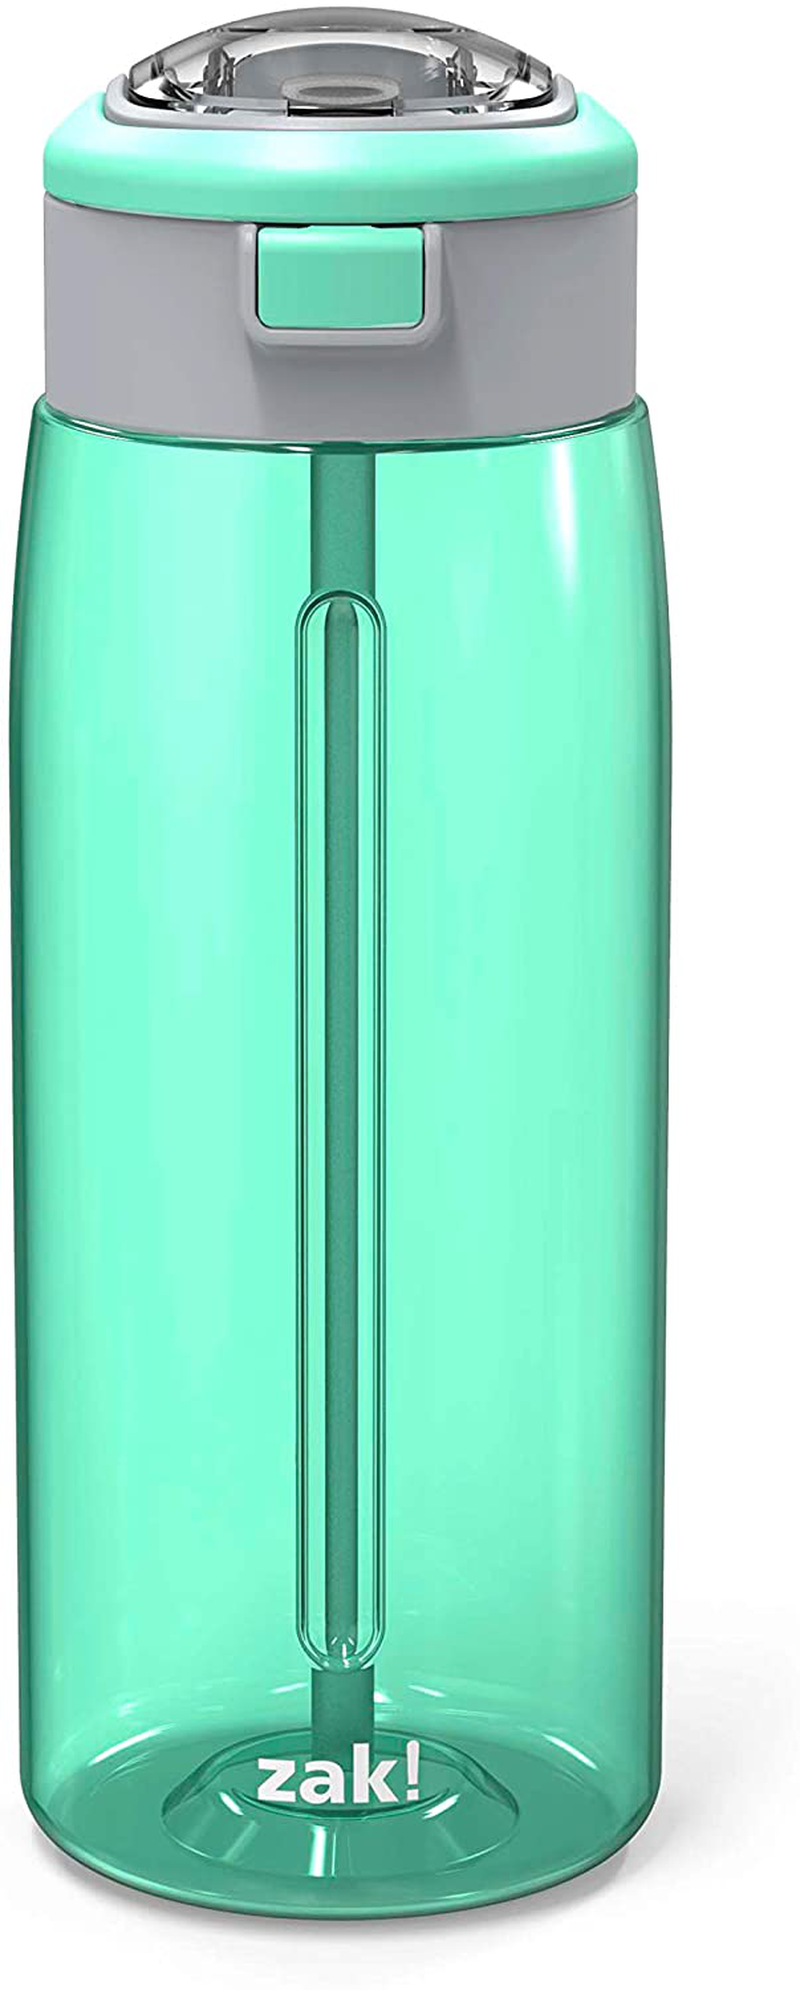 Zak Designs Genesis Durable Plastic Water Bottle with Interchangeable Lid and Built-In Carry Handle, Leak-Proof Design is Perfect for Outdoor Sports (32oz, Viola)